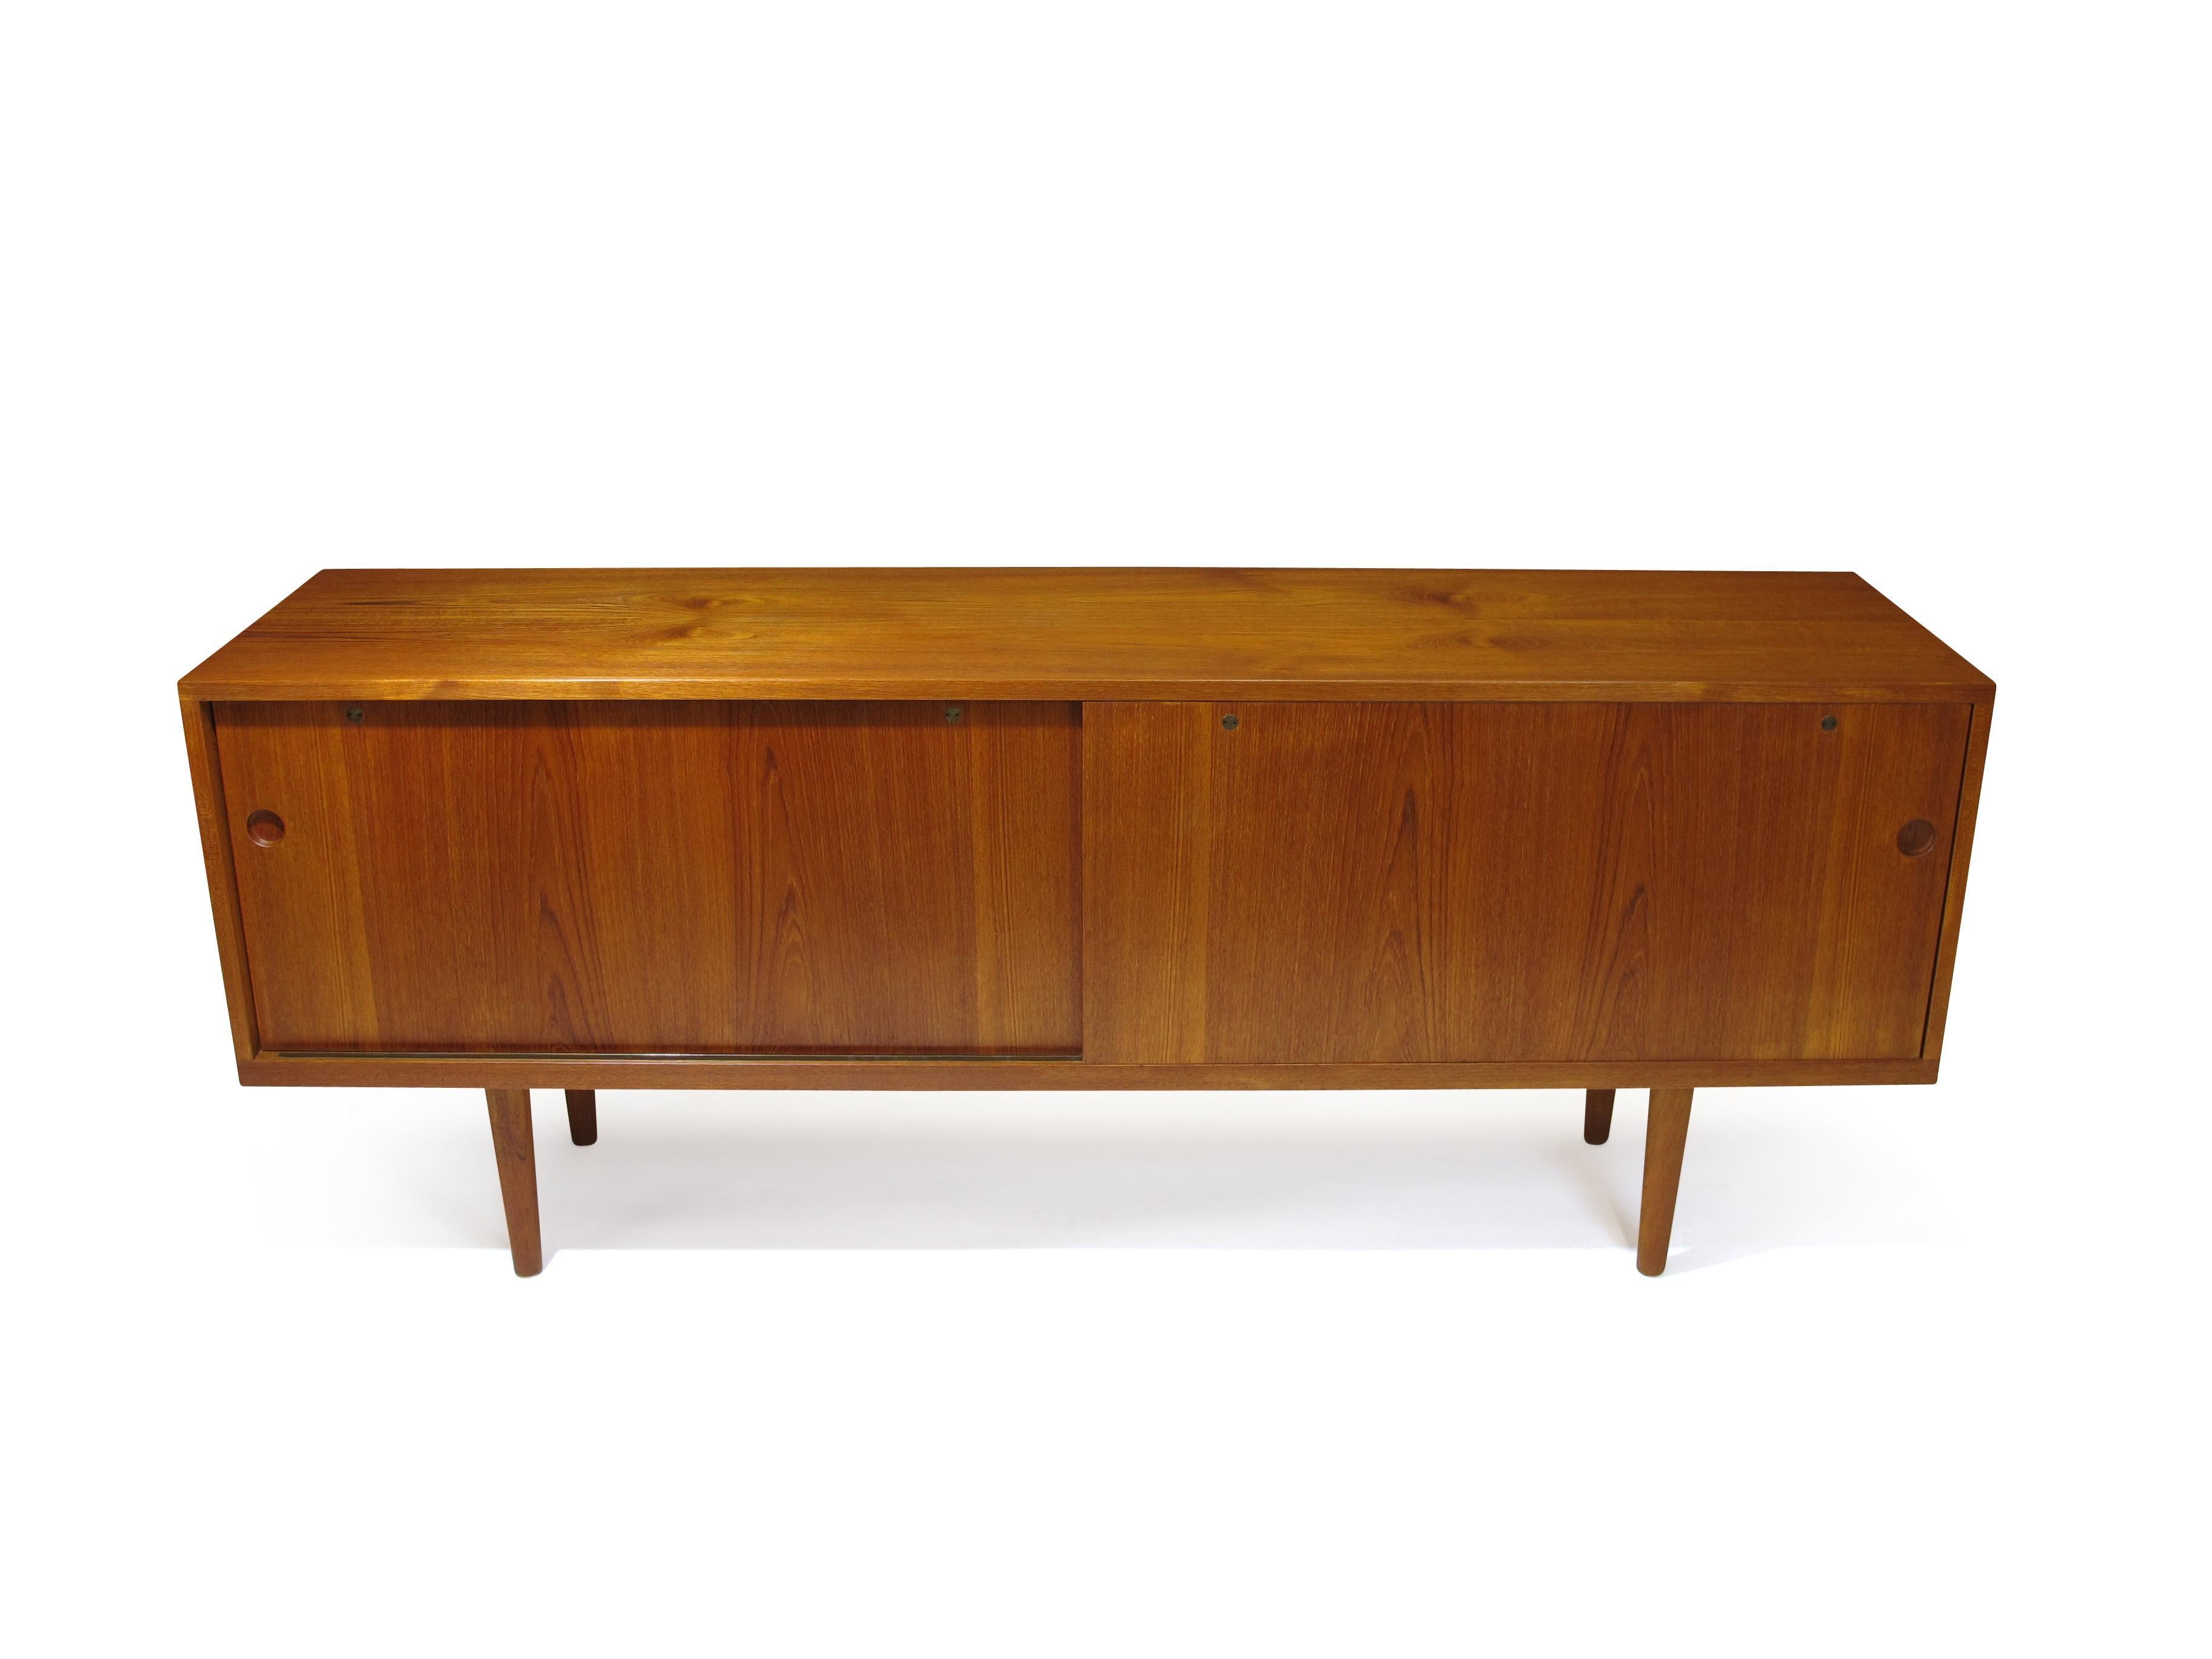 Sideboard designed by Hans Wegner for Ry Mobler, model 26. Minimal design with two sliding doors revealing an interior of white oak with adjustable shelves and silverware drawers; raised on round tapered teak legs. The cabinet has been